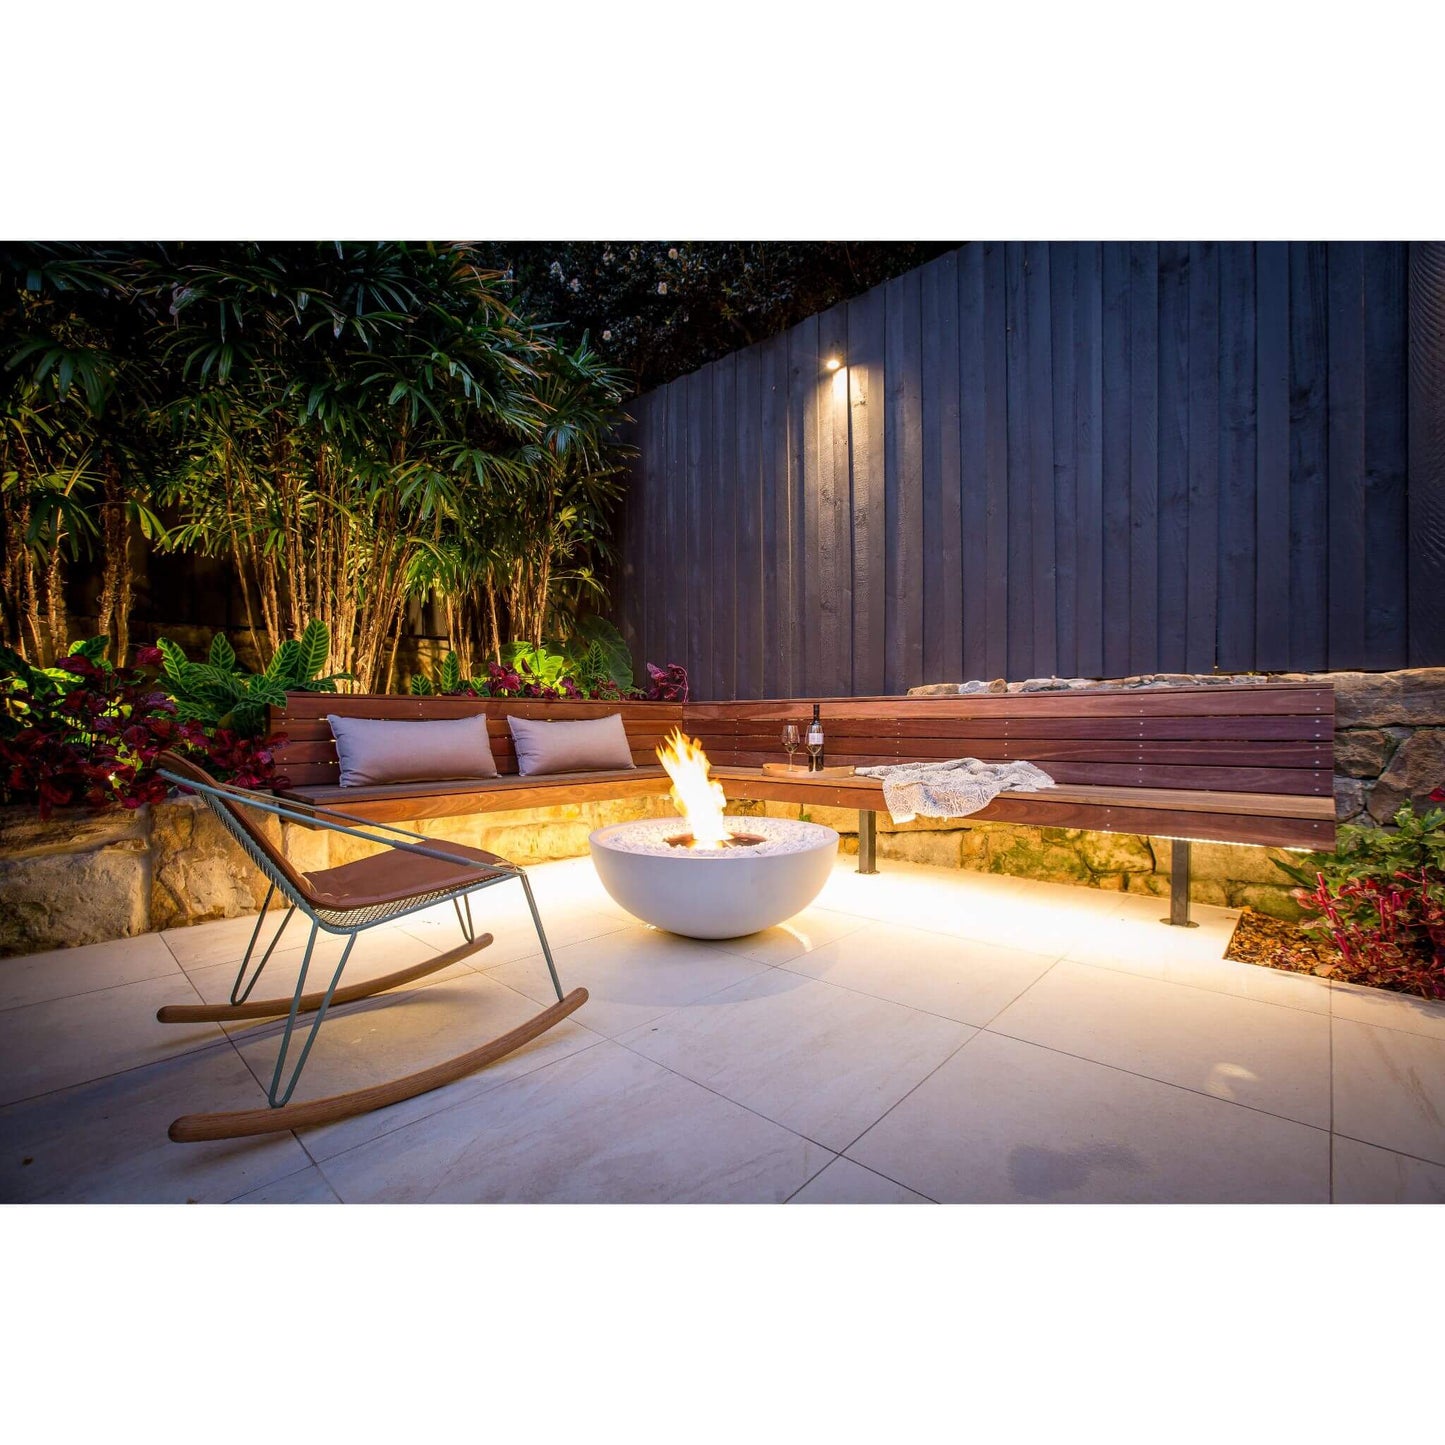 Ecosmart Fire Mix 850 bioethanol fire pit bowl in white concrete with a stainless steel burner positioned on outdoor garden patio area